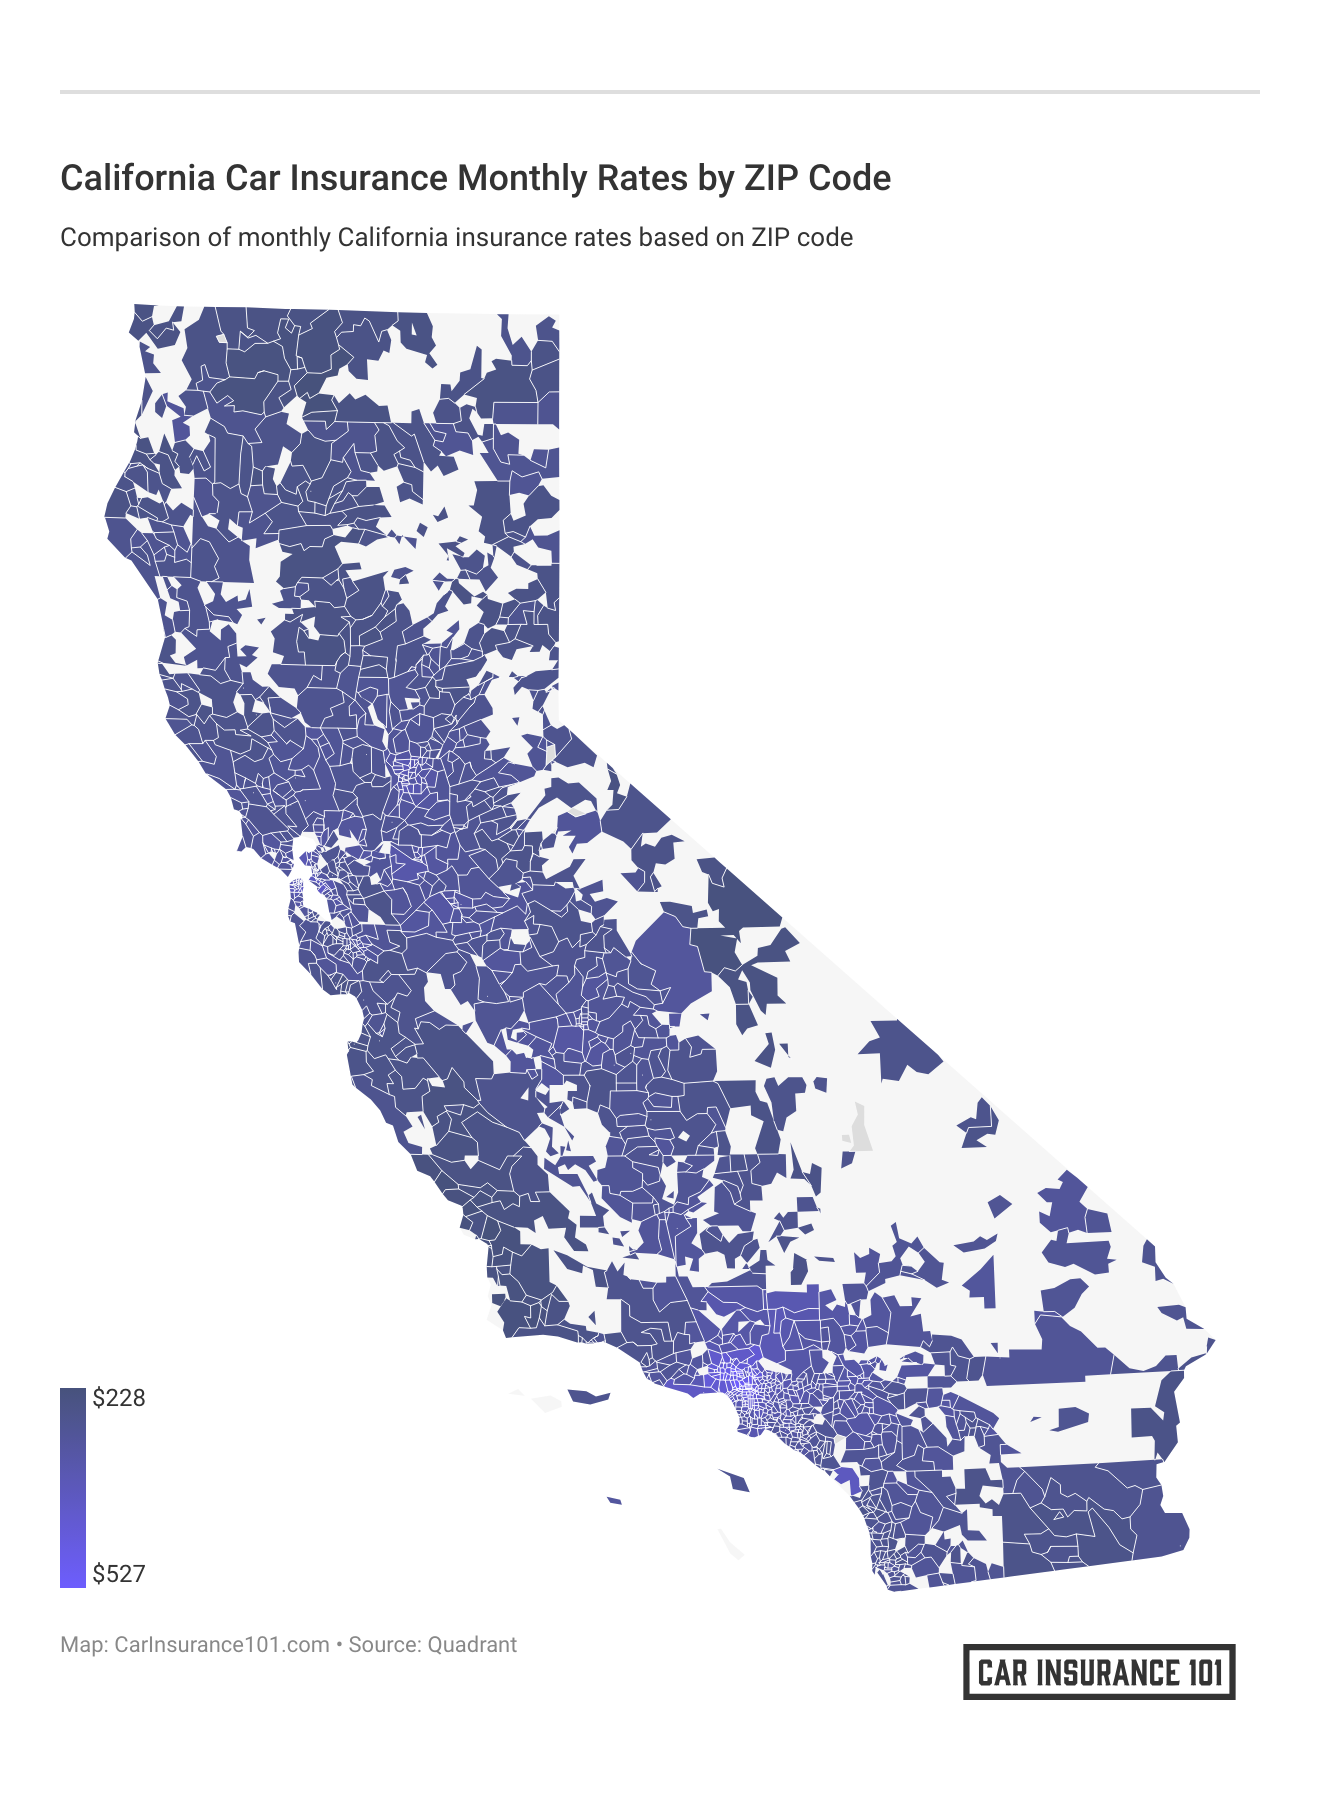 <h3>California Car Insurance Monthly Rates by ZIP Code</h3>